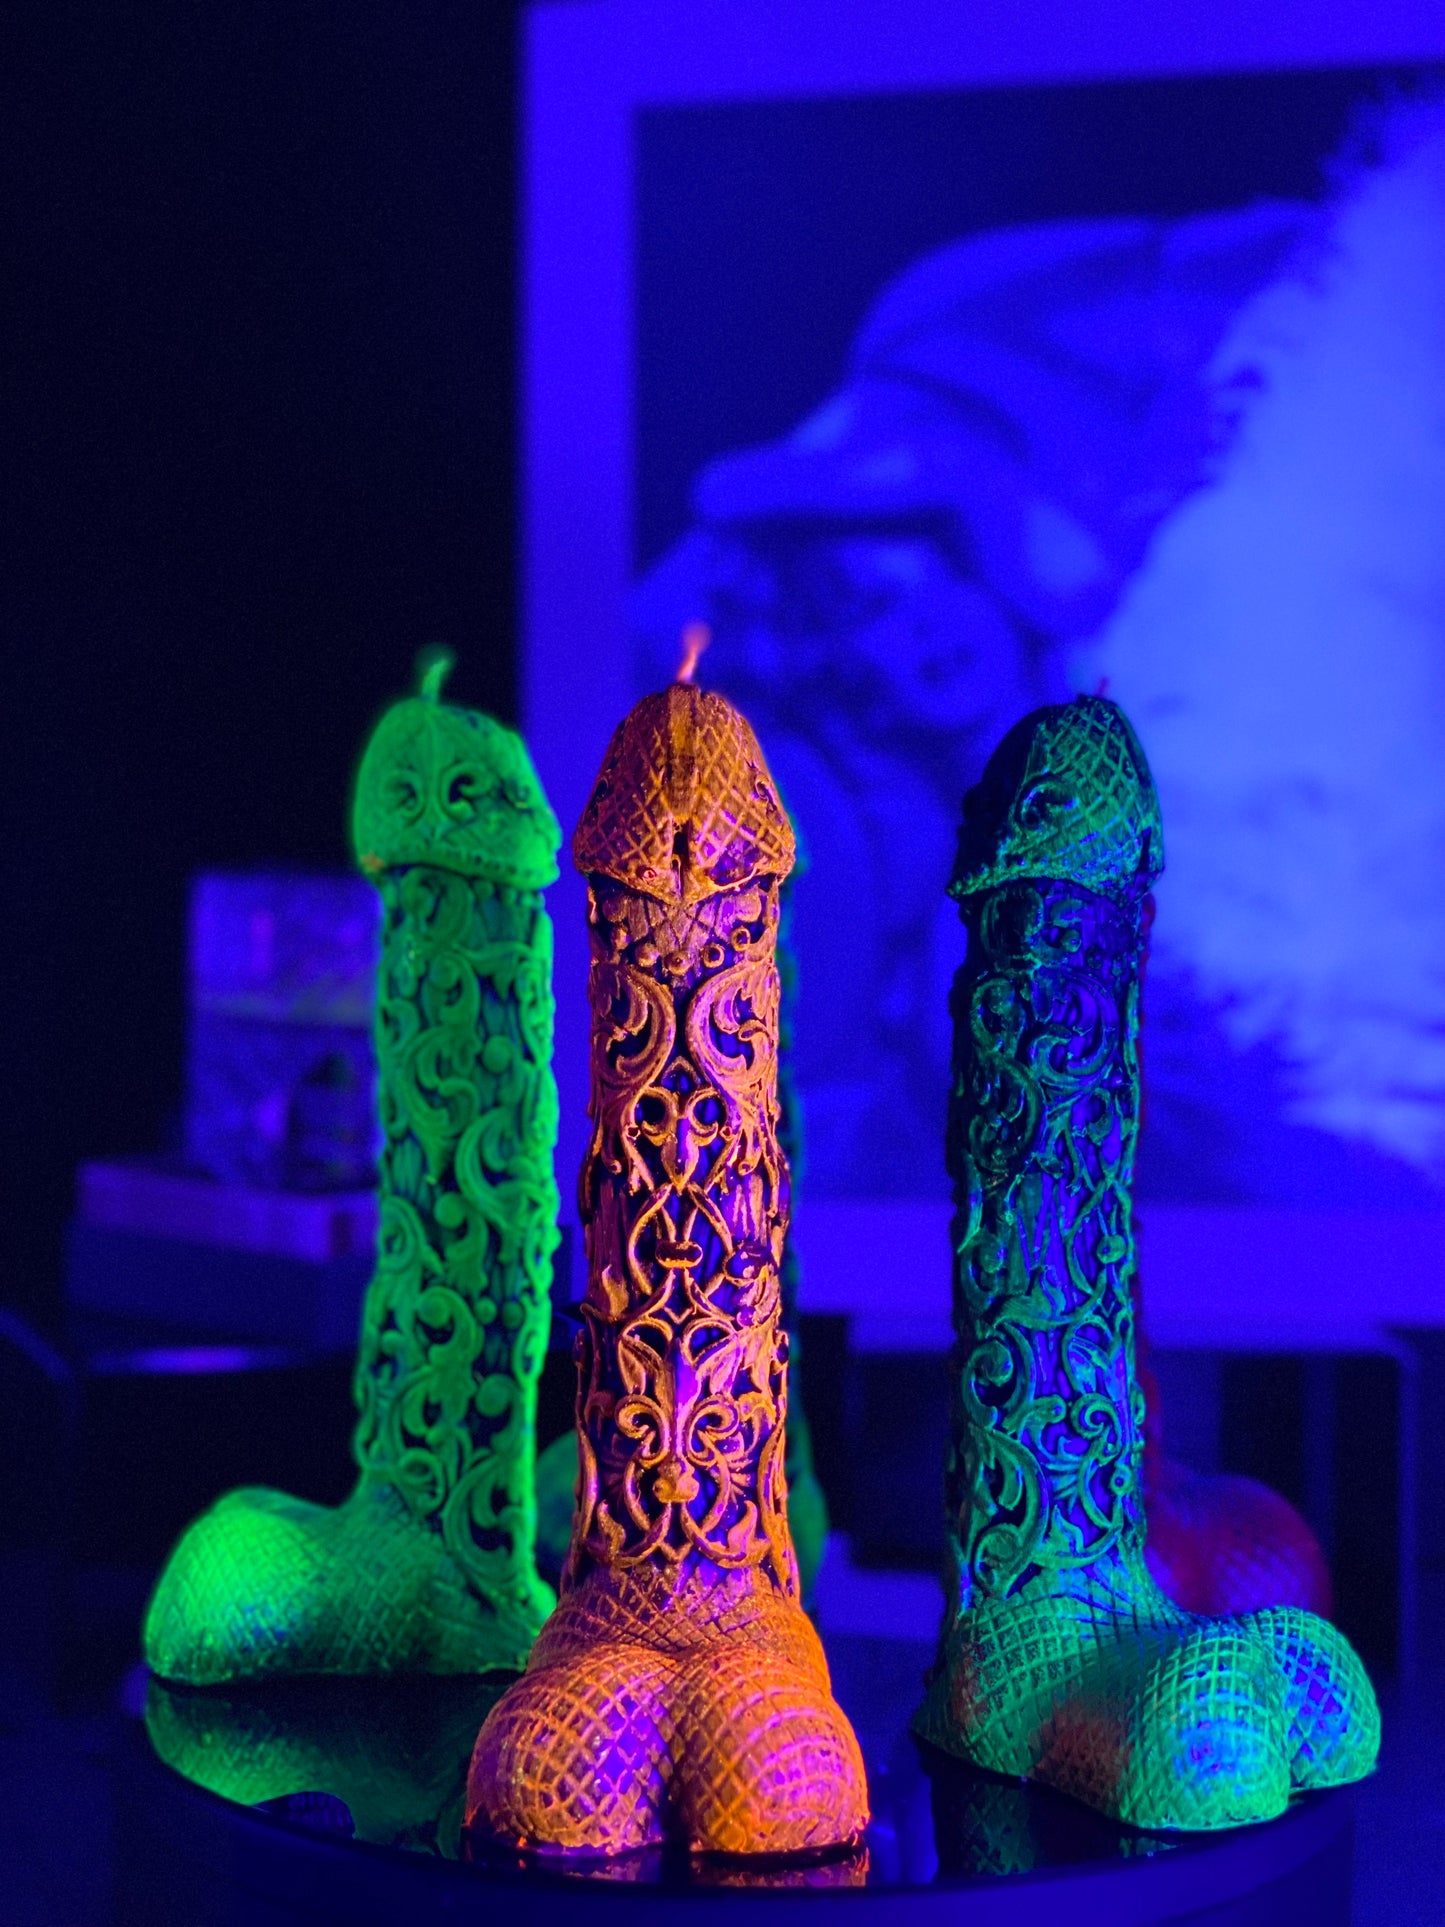 Candle Male, Body, Bridal party, Erotica, Nude, Carving Peni, Party, Phallus, Glow in Dark, Neon, Bridesmade